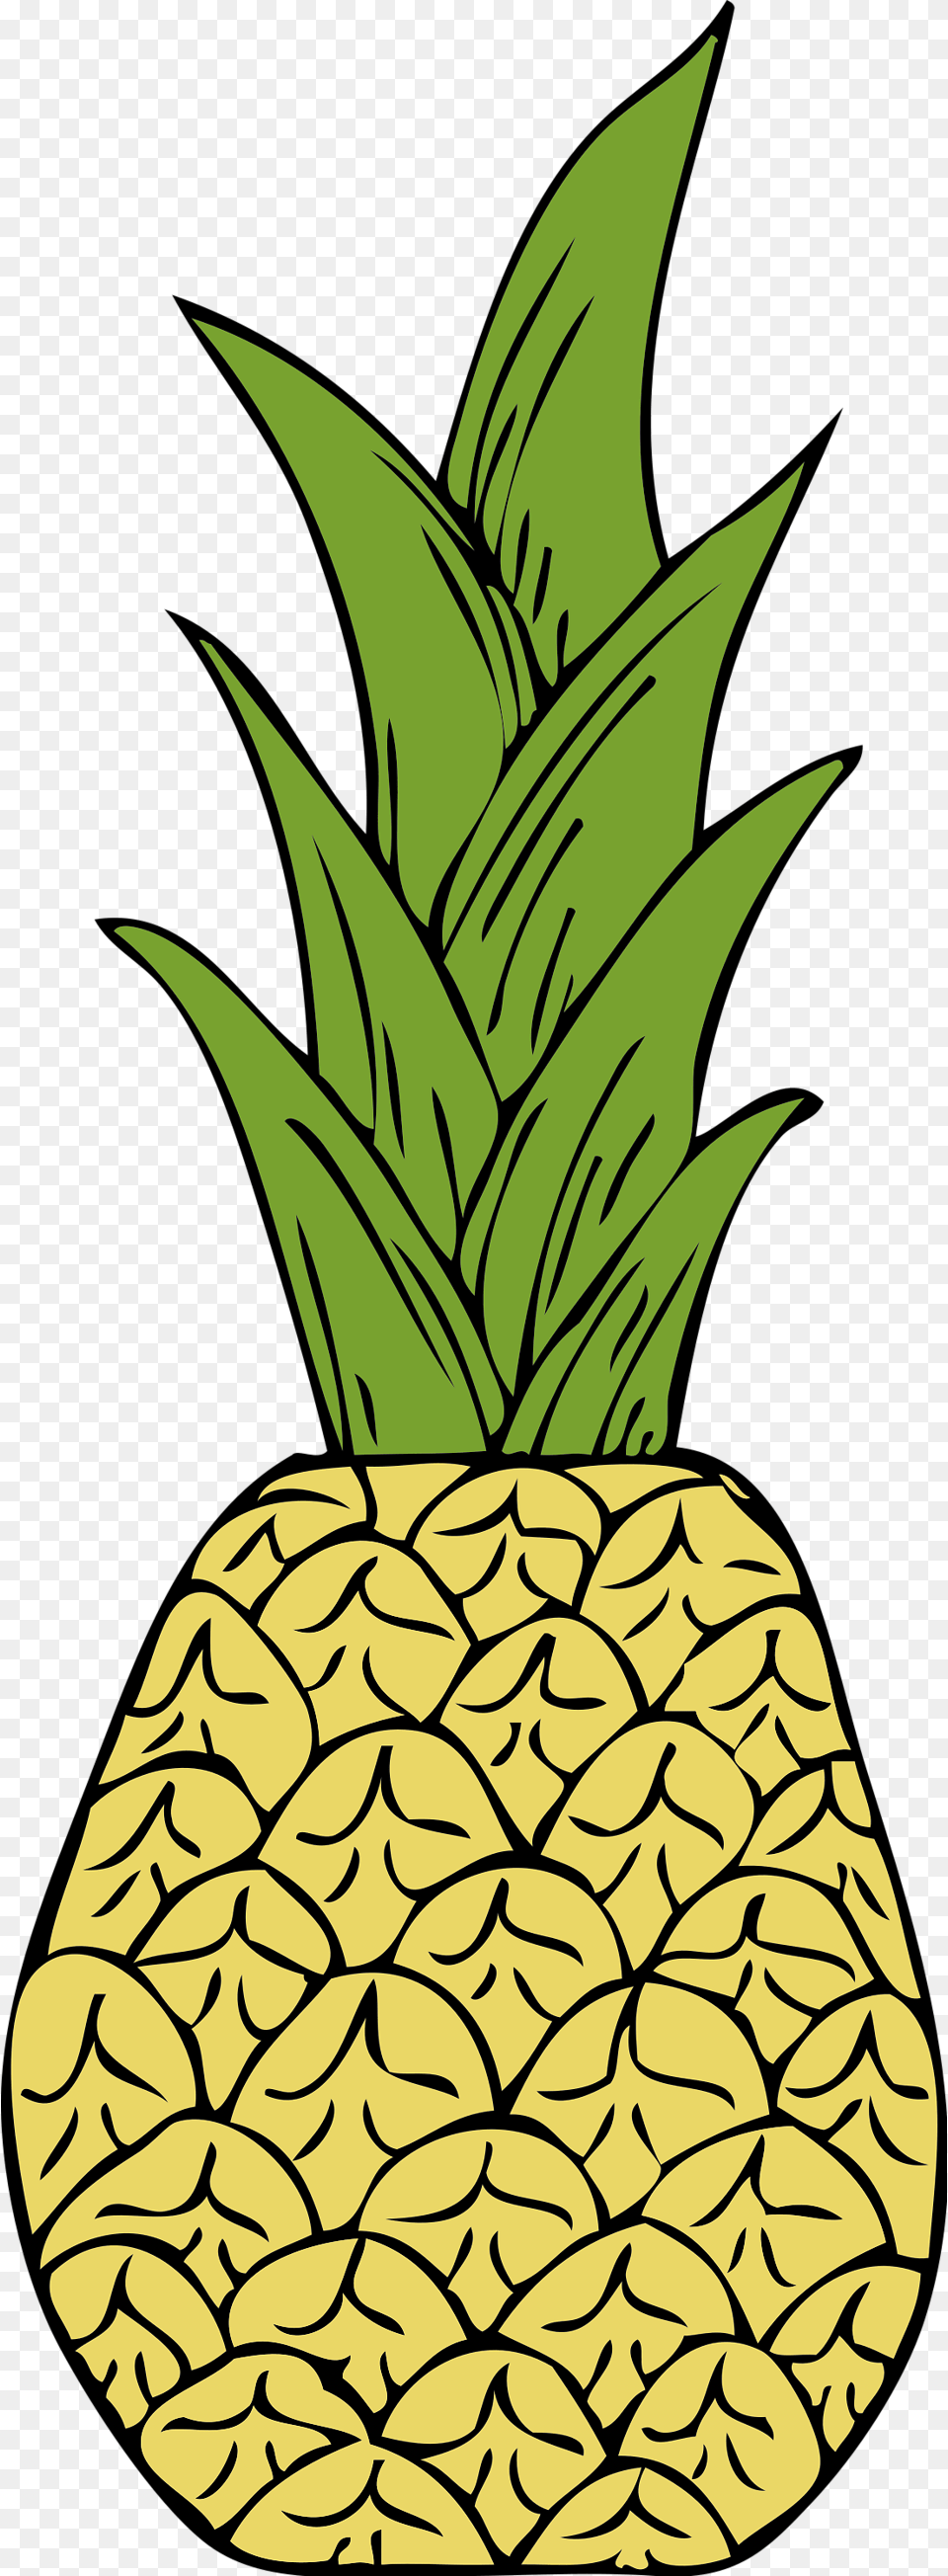 Pineapple Drawing Clip Art Transparent Pineapple Tumblr, Food, Fruit, Plant, Produce Png